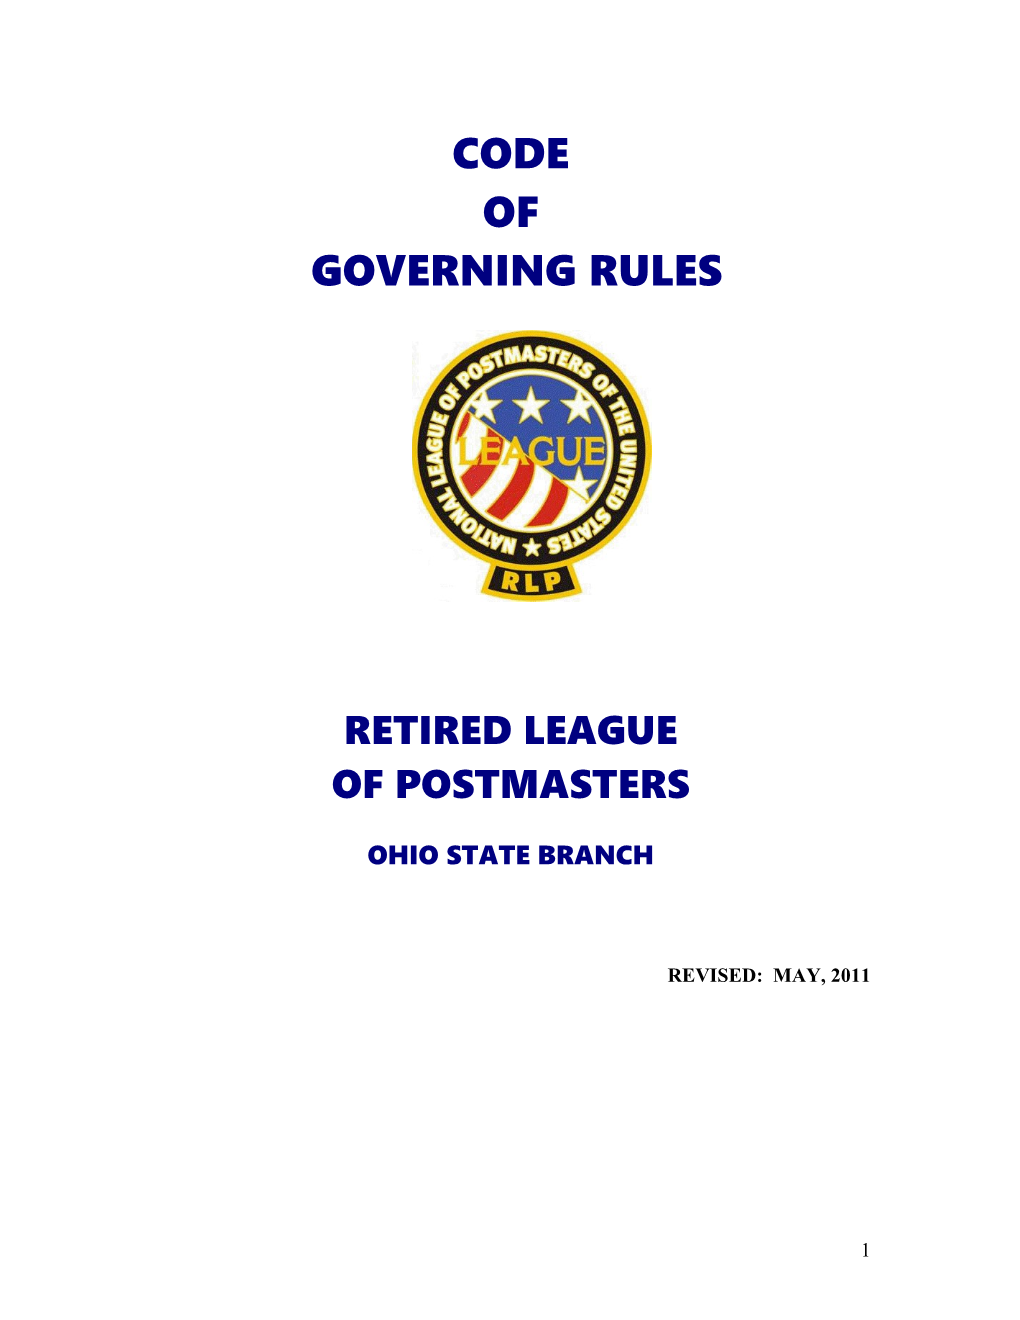 Governing Rules